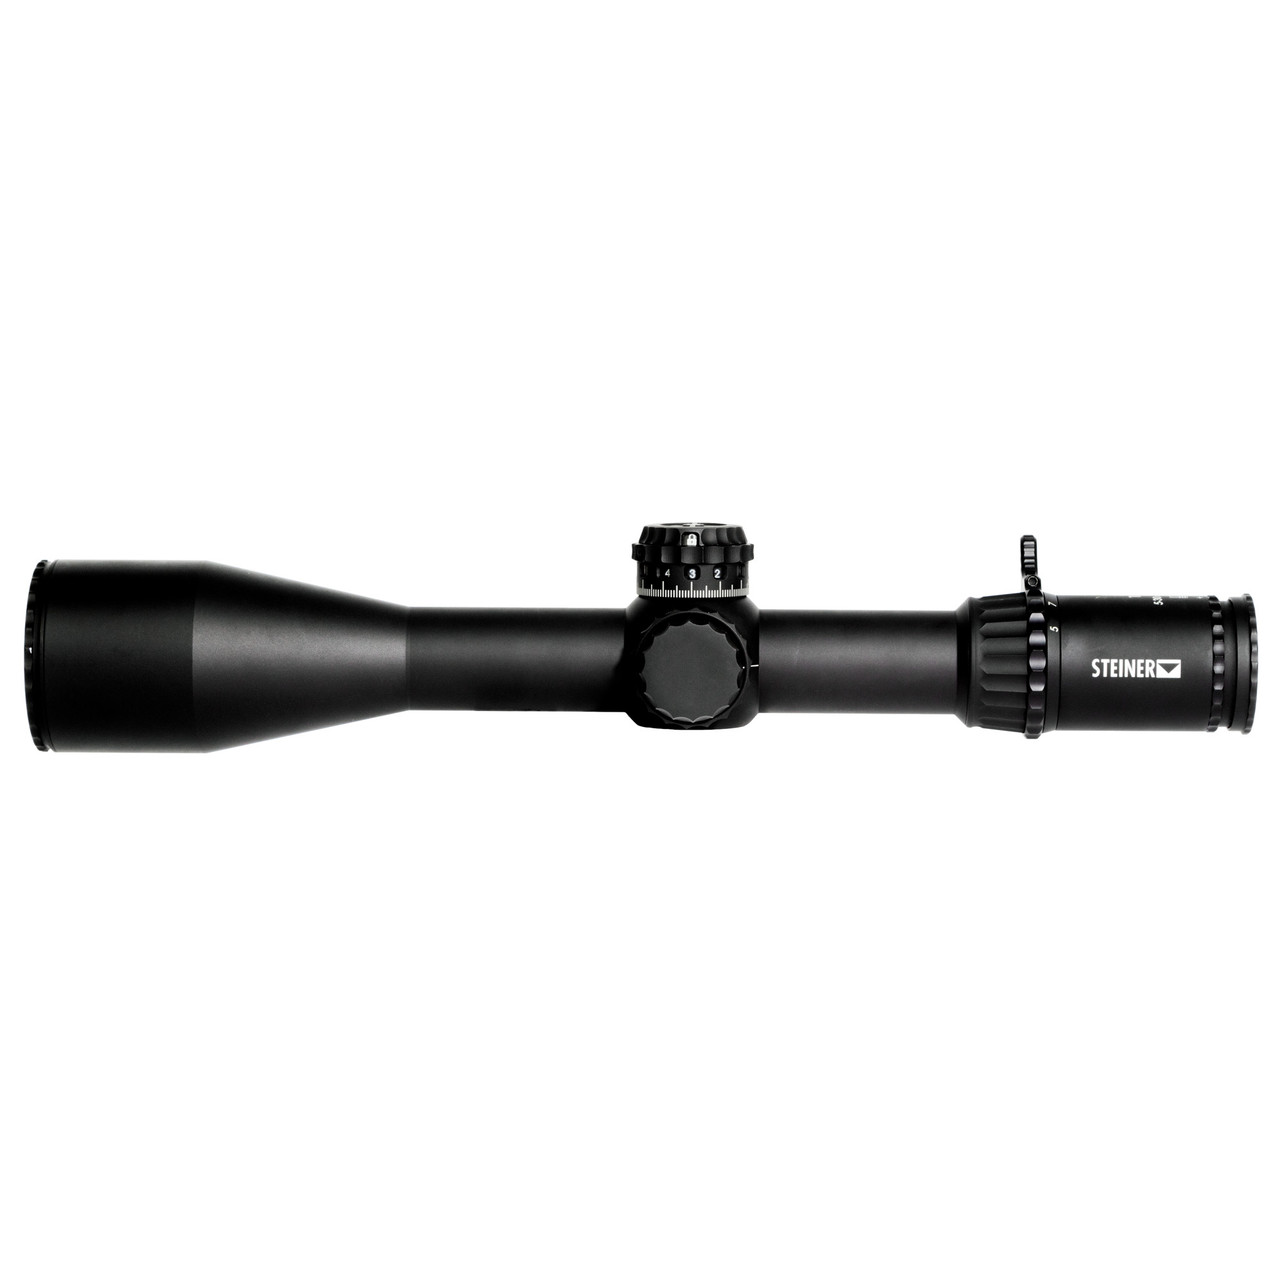 Steiner 5124 T6Xi, Rifle Scope, 5-30X, 56mm Objective, 34mm Tube Diameter, MSR2 Reticle, 1/4 MOA, First Focal Plane, Matte Finish, Black